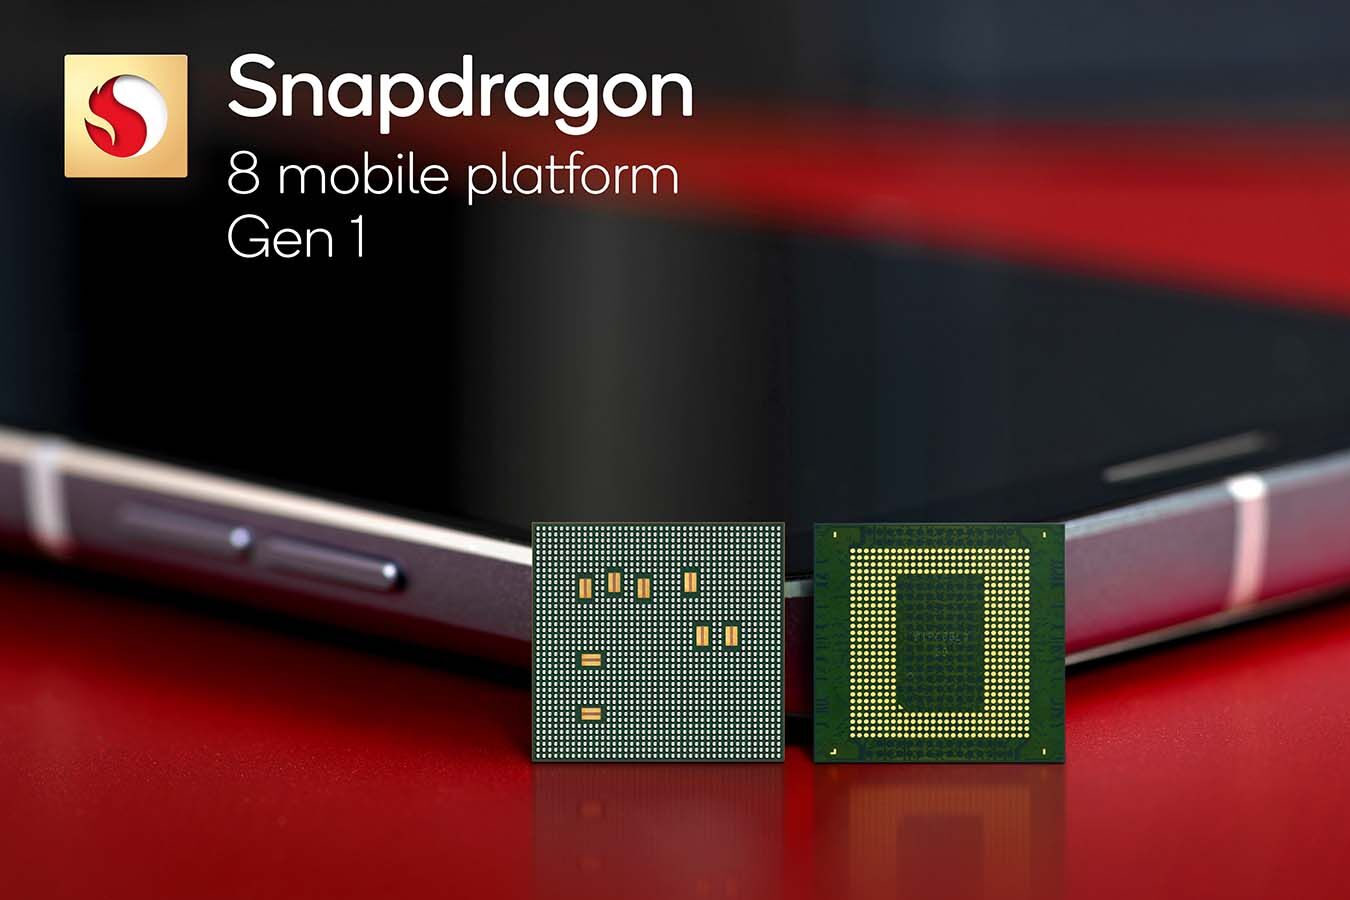 Qualcomm will hold a presentation on May 20. We expect a Snapdragon 8 Gen 1 Plus processor